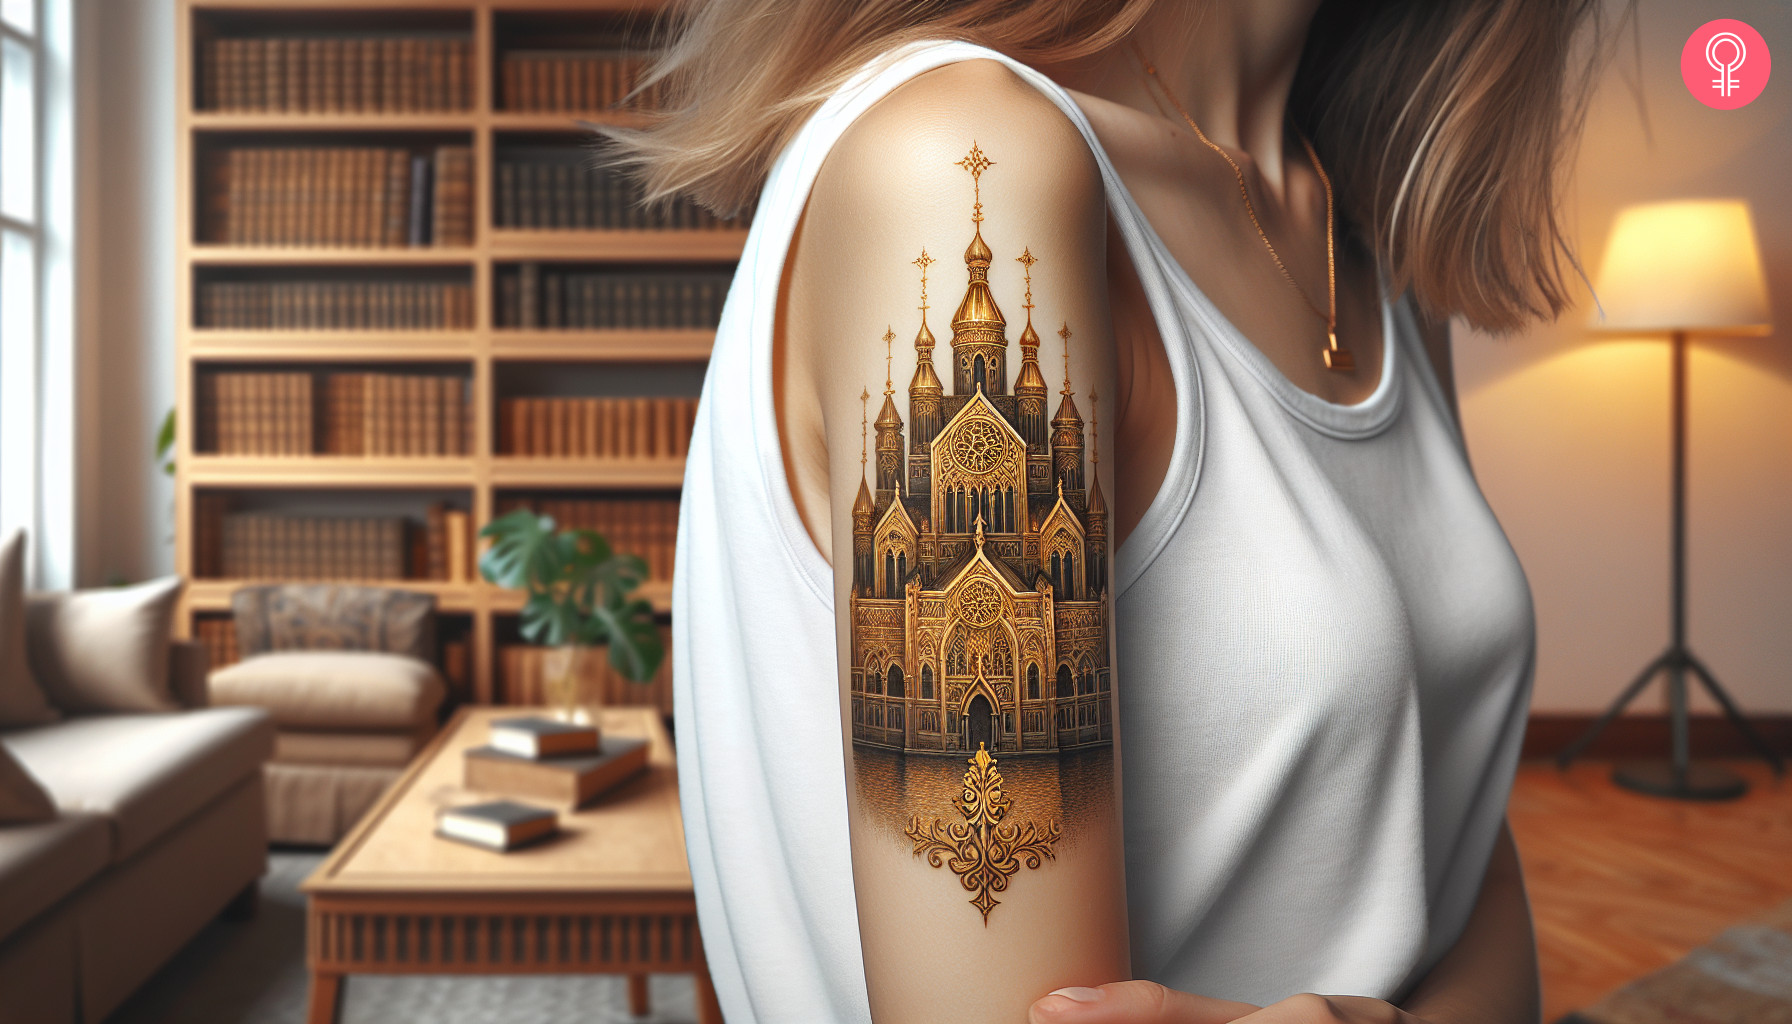 A golden cathedral tattoo on the upper arm